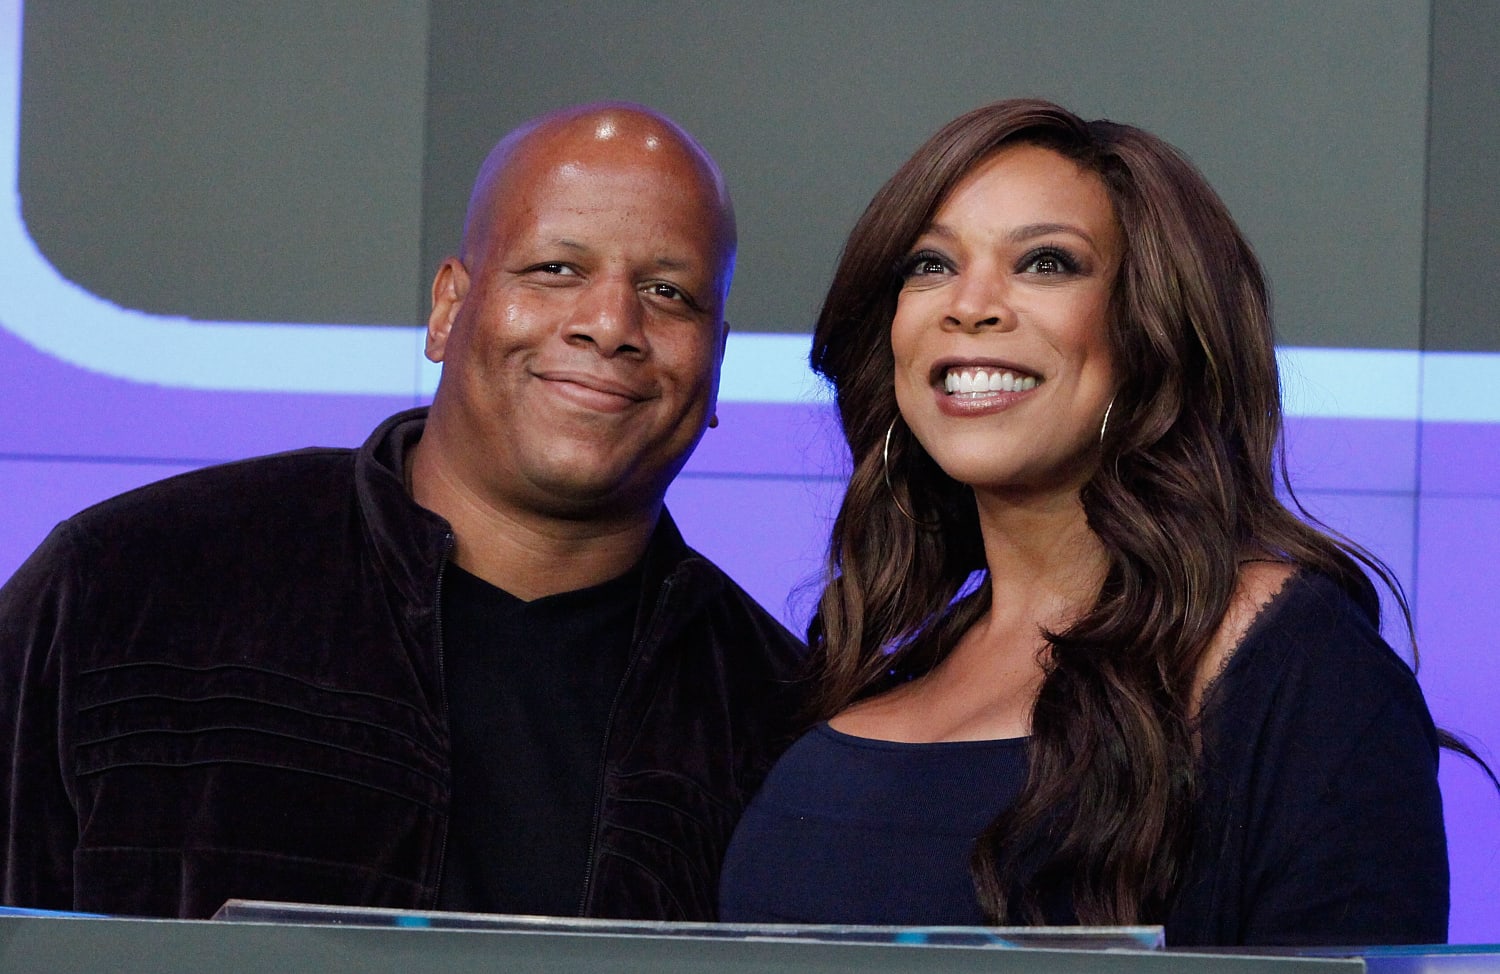 Wendy Williams' ex Kevin Hunter slams show's 'unceremonious' finale: 'It's a travesty'